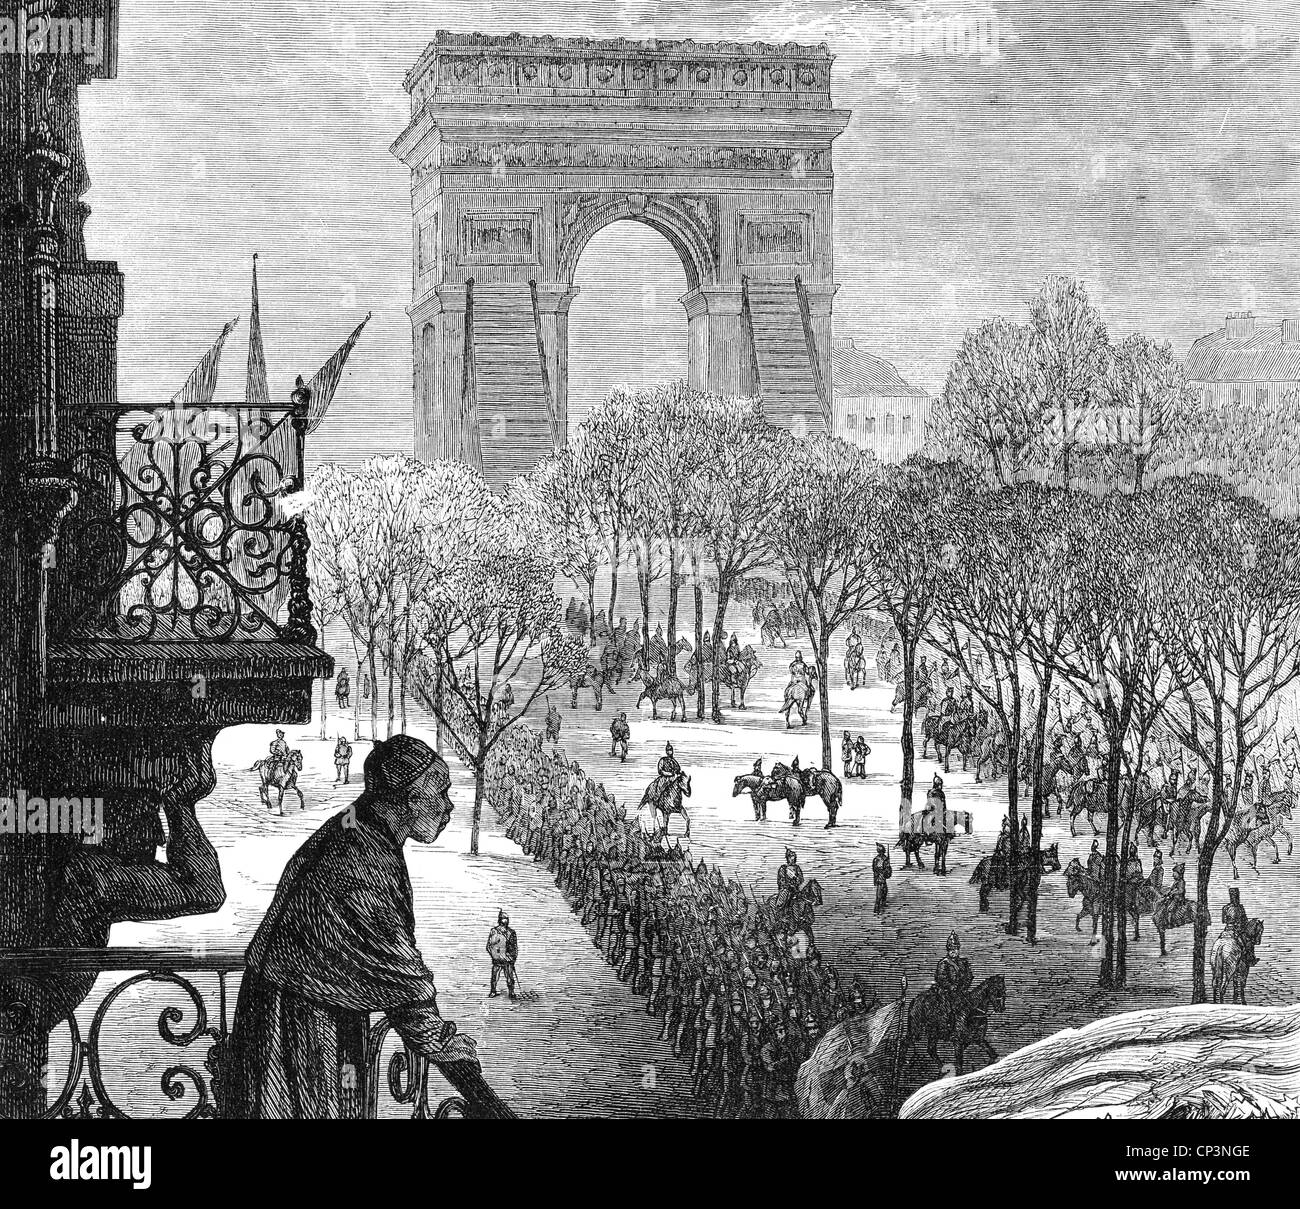 events, Franco-Prussian War 1870 - 1871, occupation of Paris, German troops entering the city, 1.3.1871, wood engraving, 19th century, Arc de Triomphe, soldiers, spectator, balcony, Germany, France, Franco - Prussian, historic, historical, people, Additional-Rights-Clearences-Not Available Stock Photo